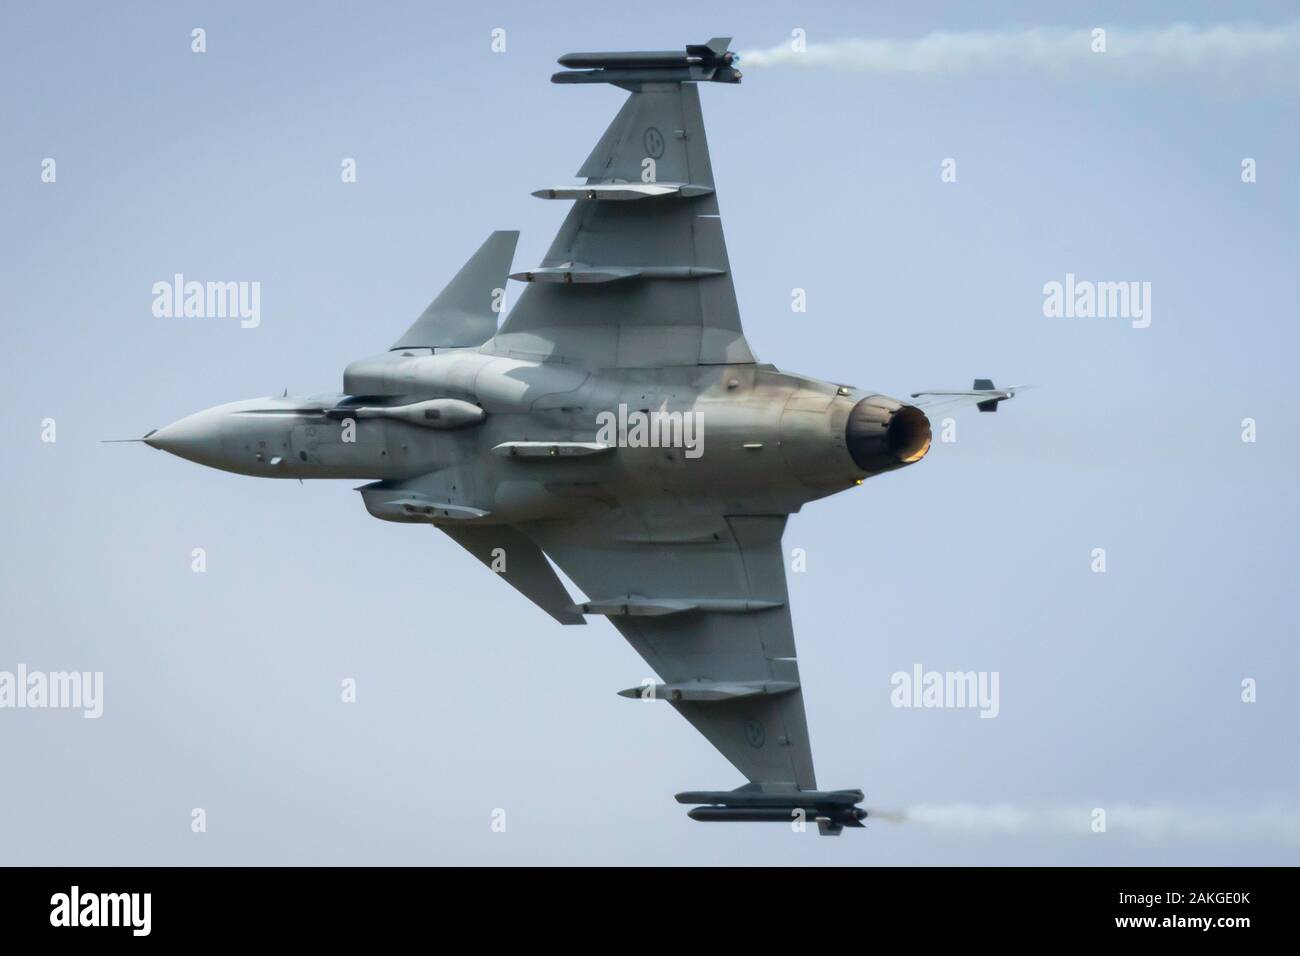 Fairford, Gloucestershire, UK - July 20th, 2019: Saab JAS 39 Gripen displaying at Fairford International Air Tattoo 2019 Stock Photo